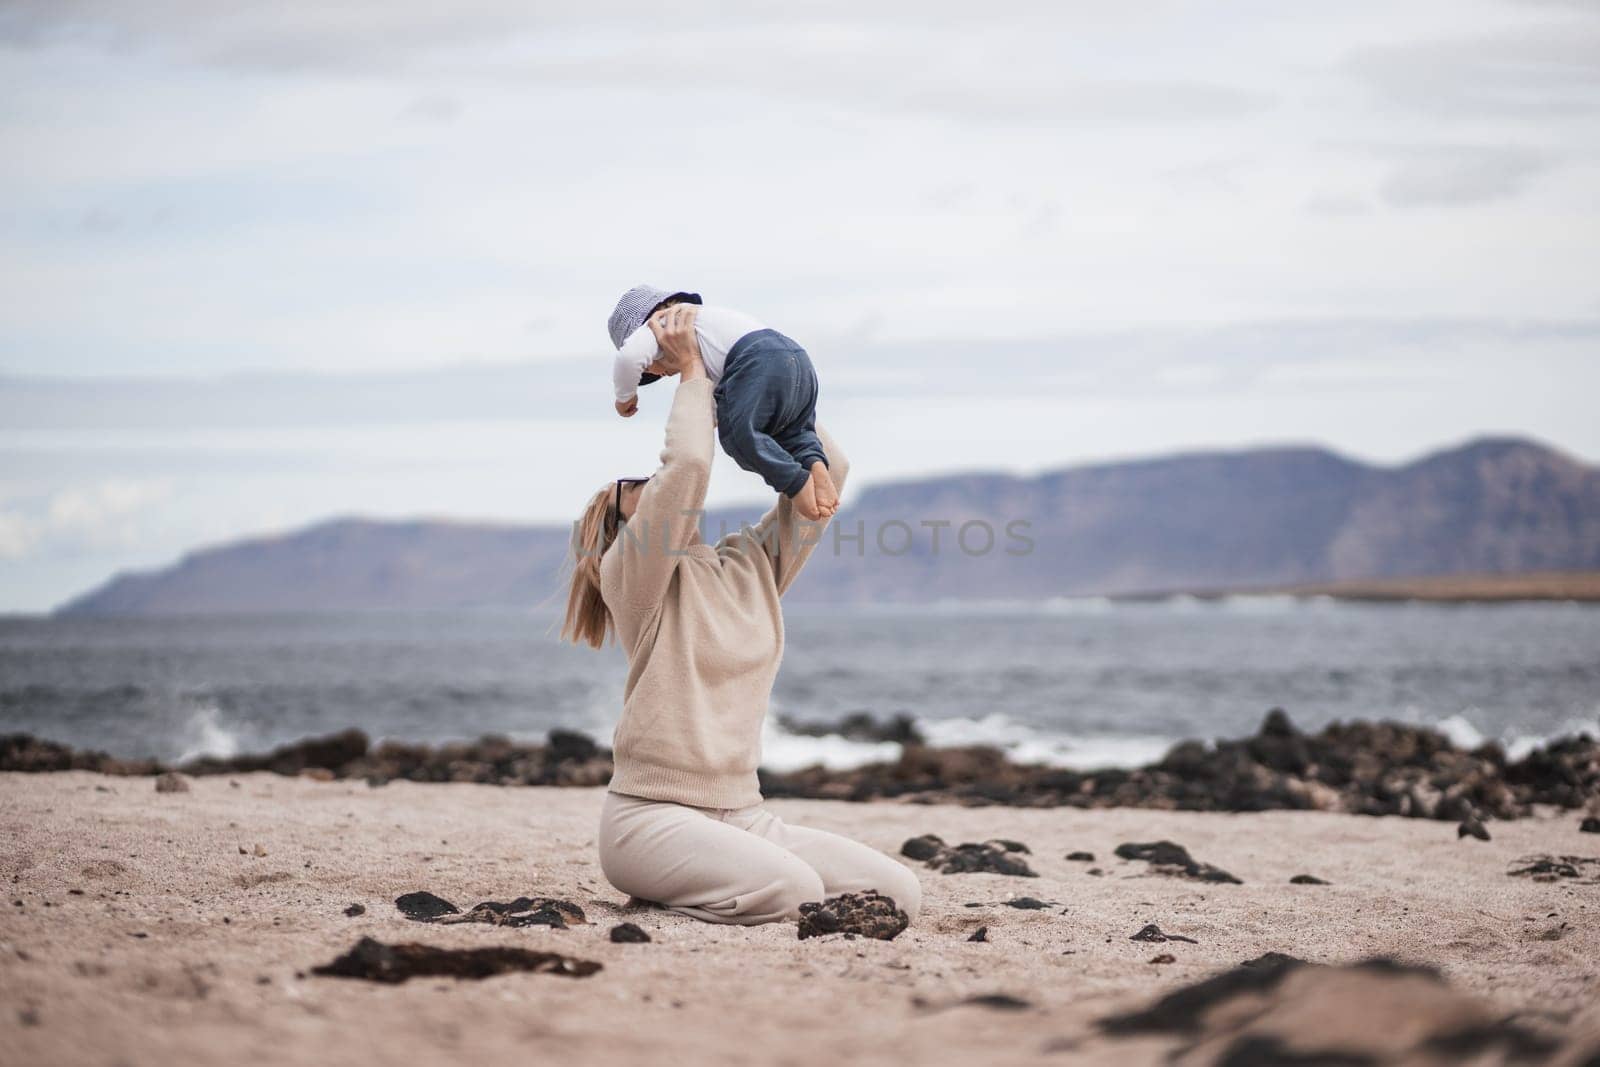 Mother enjoying winter vacations holding, playing and lifting his infant baby boy son high in the air on sandy beach on Lanzarote island, Spain. Family travel and vacations concept by kasto